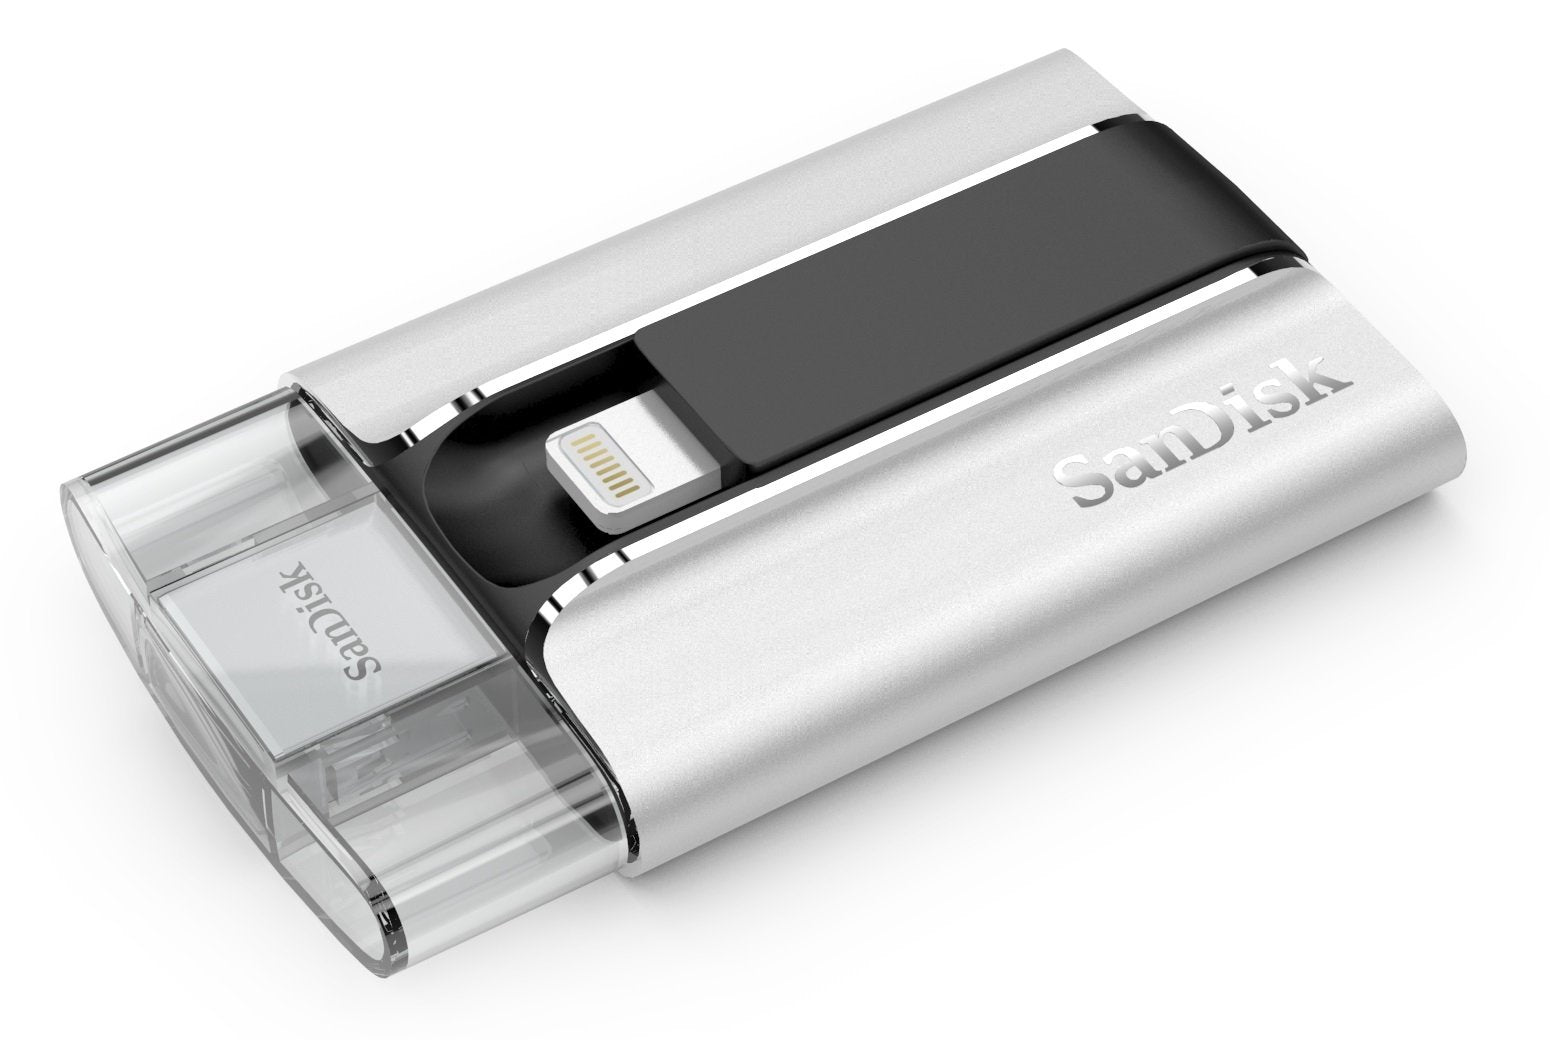 SanDisk iXpand 32GB USB 2.0 Mobile Flash Drive with Lightning connector For iPhones, iPads & Computers- SDIX-032G-G57 Old Version